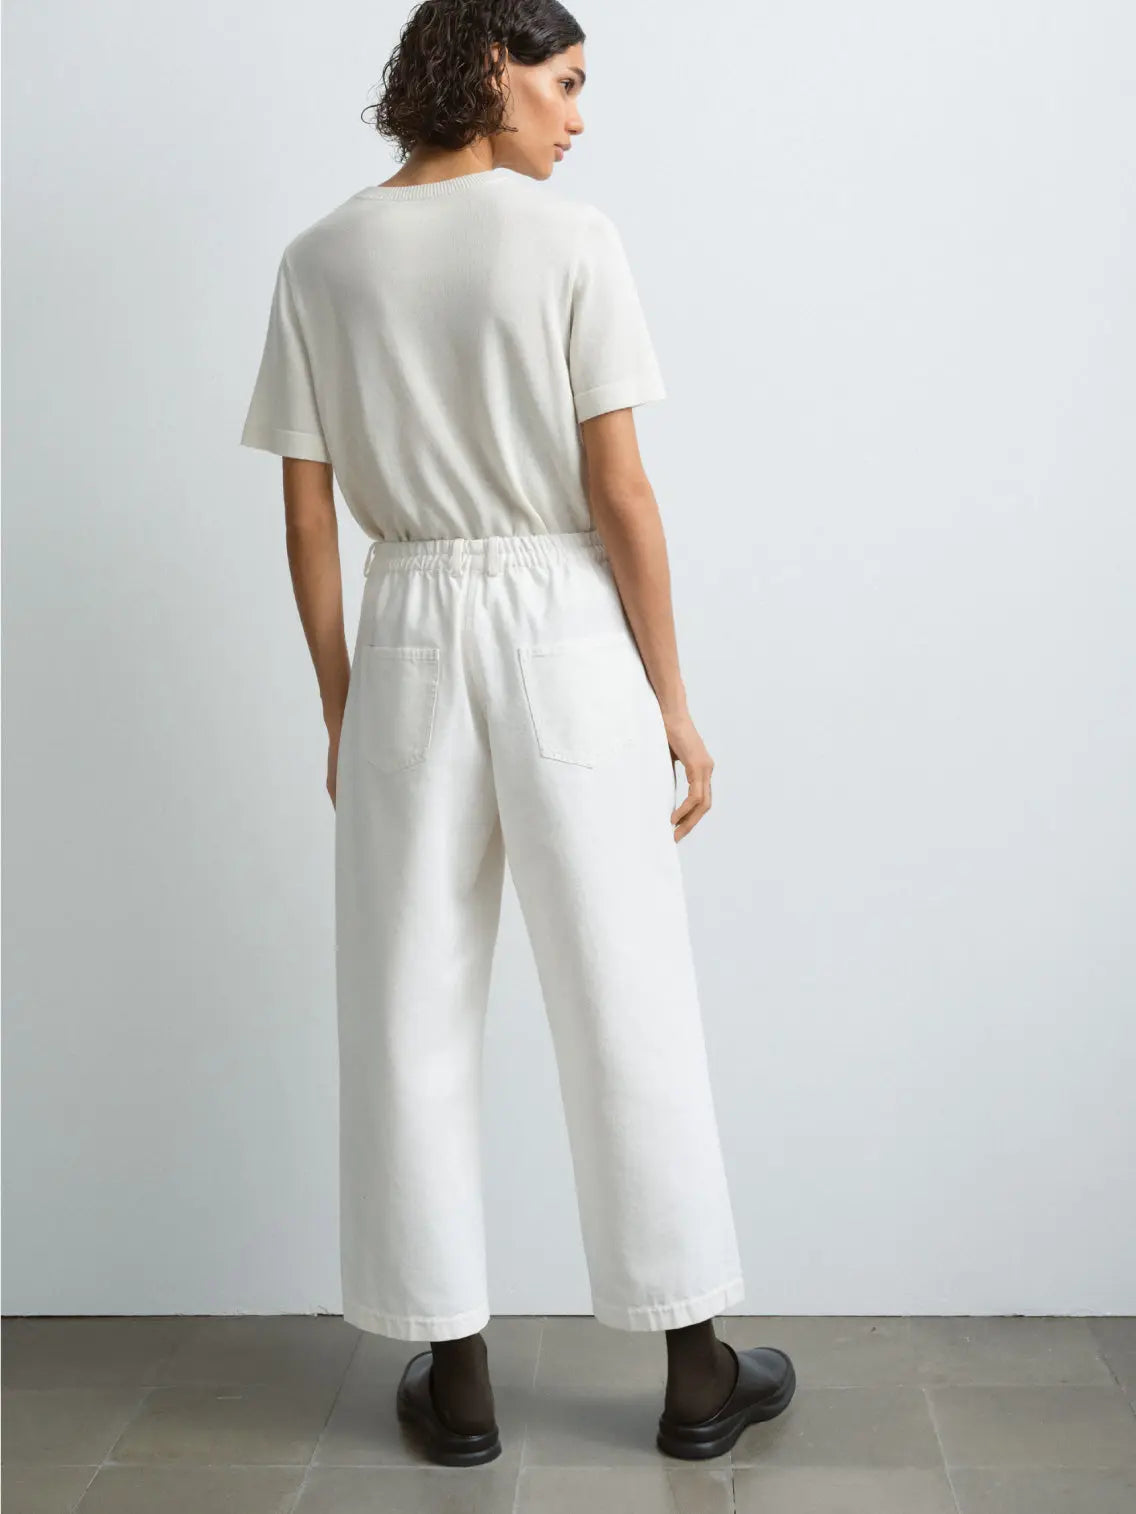 A pair of Straight Denim Pants Off-White from Cordera is displayed against a plain white background. The pants feature a button closure and belt loops at the waist, along with front pockets. The fabric appears smooth and slightly structured, embodying the chic style of Barcelona fashion.